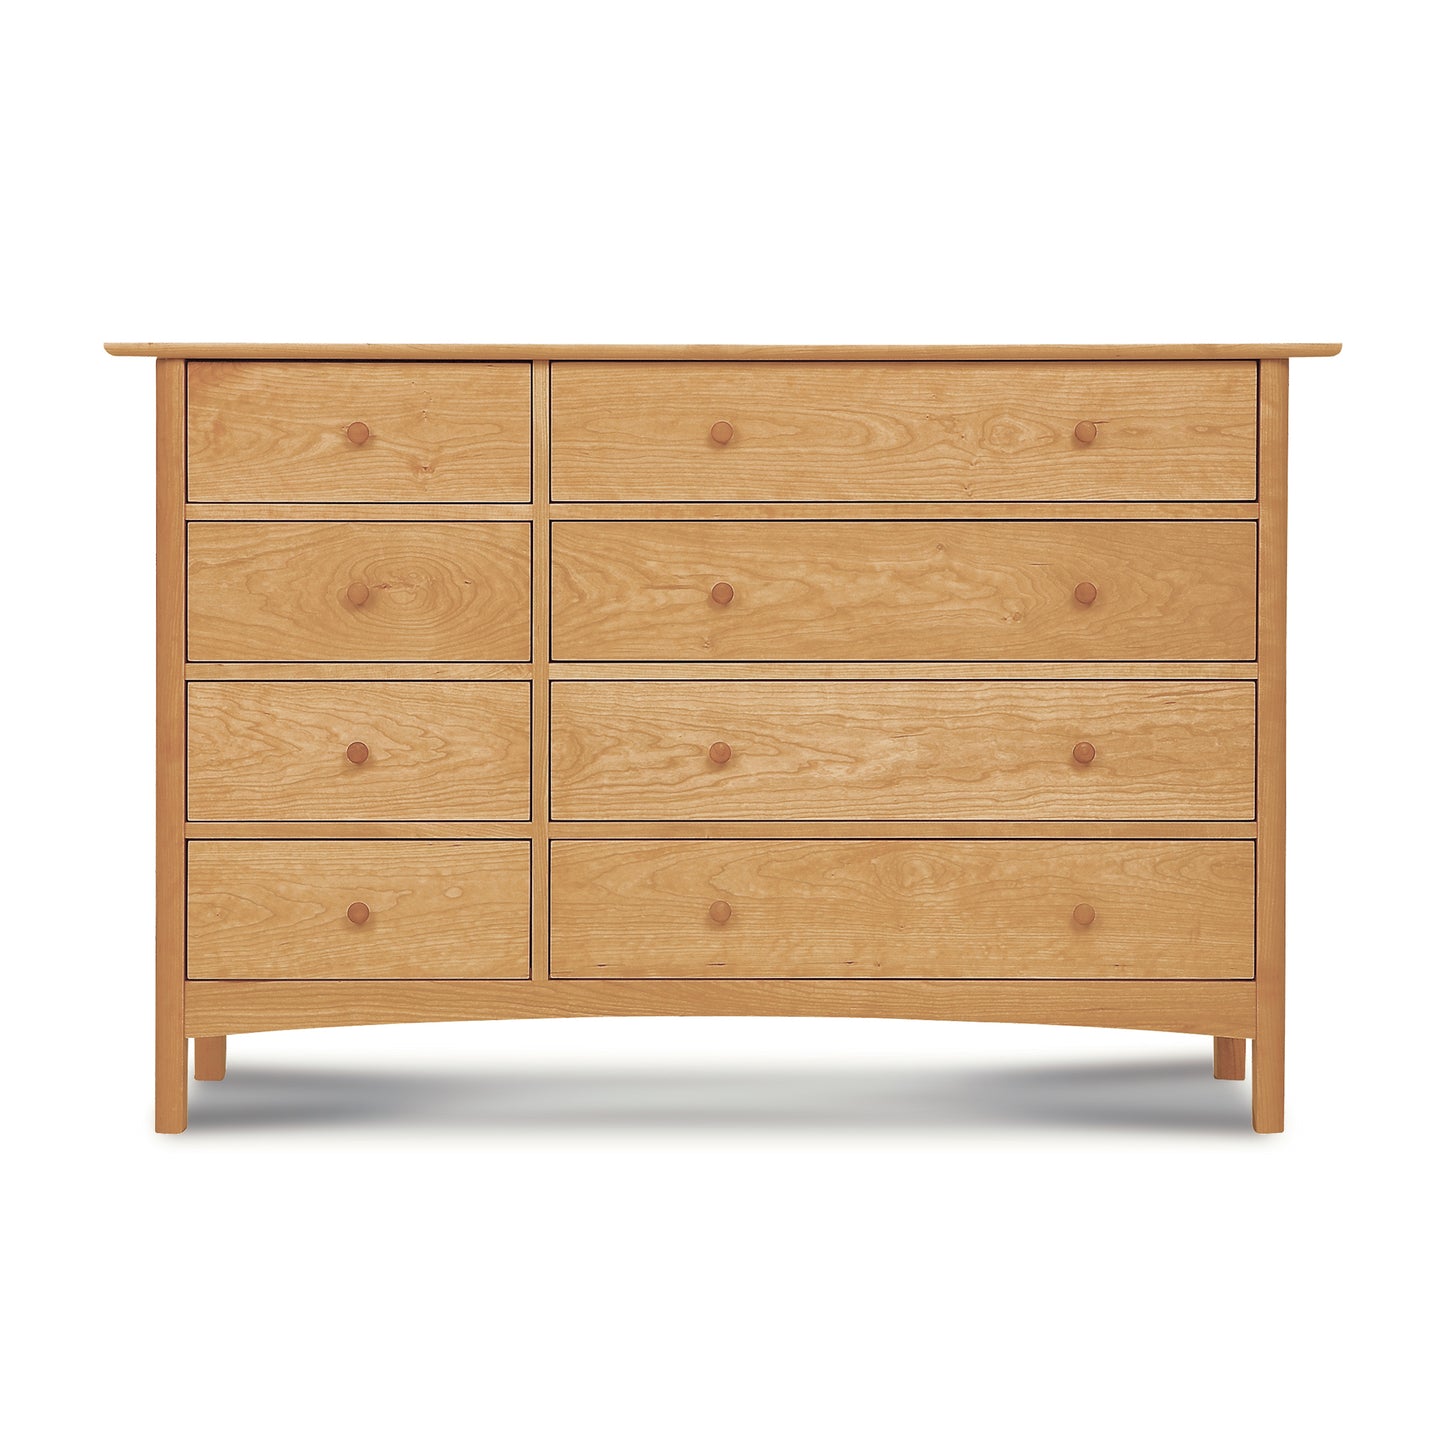 A solid hardwood Heartwood Shaker 8-Drawer Dresser #2 with round knobs by Vermont Furniture Designs against a plain background.